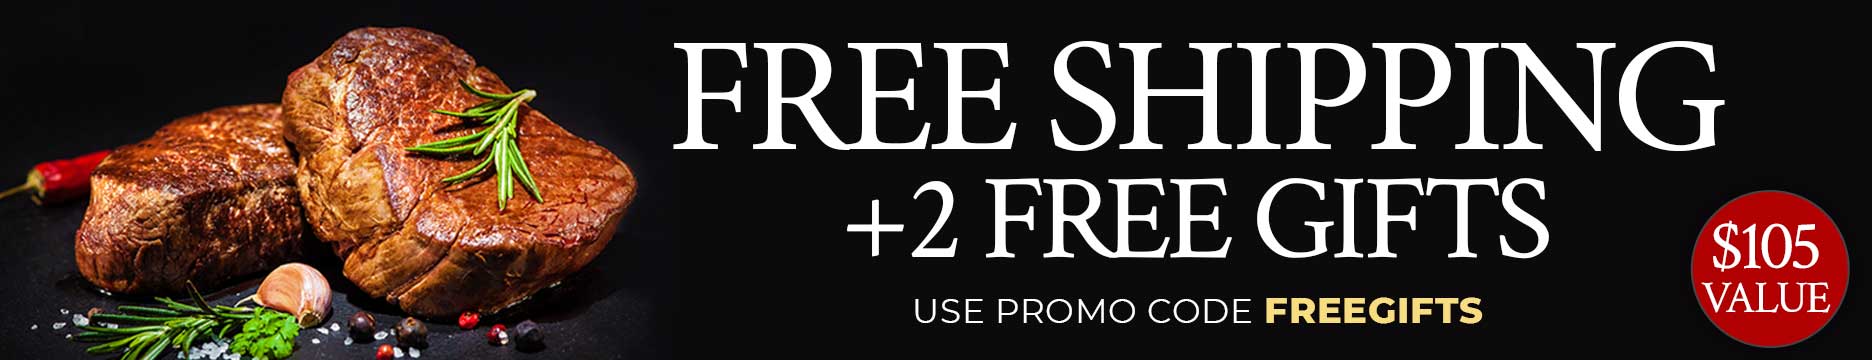 Receive 12 FREE Steak Burgers, 1 packet of Seasoning, and FREE Shipping Use Promo Code FREEGIFTS